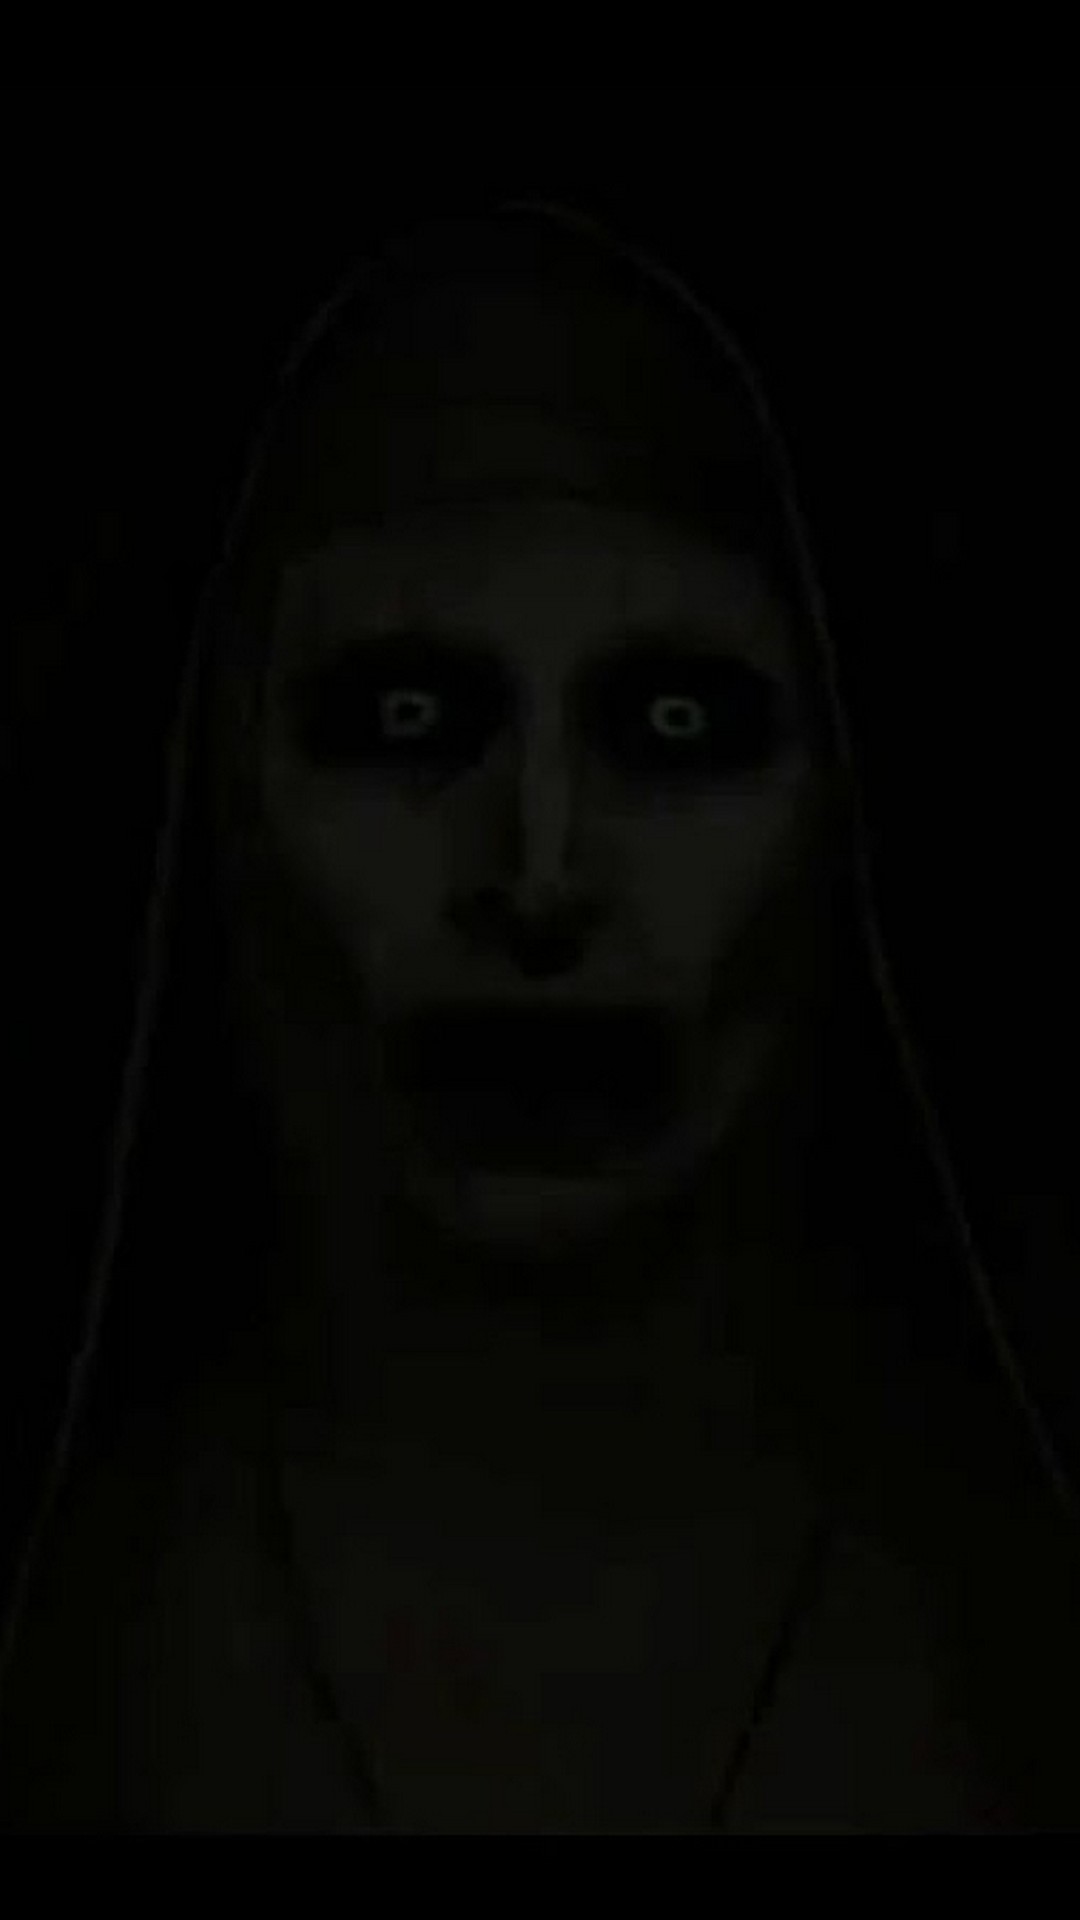 The Nun Valak iPhone Wallpaper with resolution 1080X1920 pixel. You can make this wallpaper for your iPhone 5, 6, 7, 8, X backgrounds, Mobile Screensaver, or iPad Lock Screen